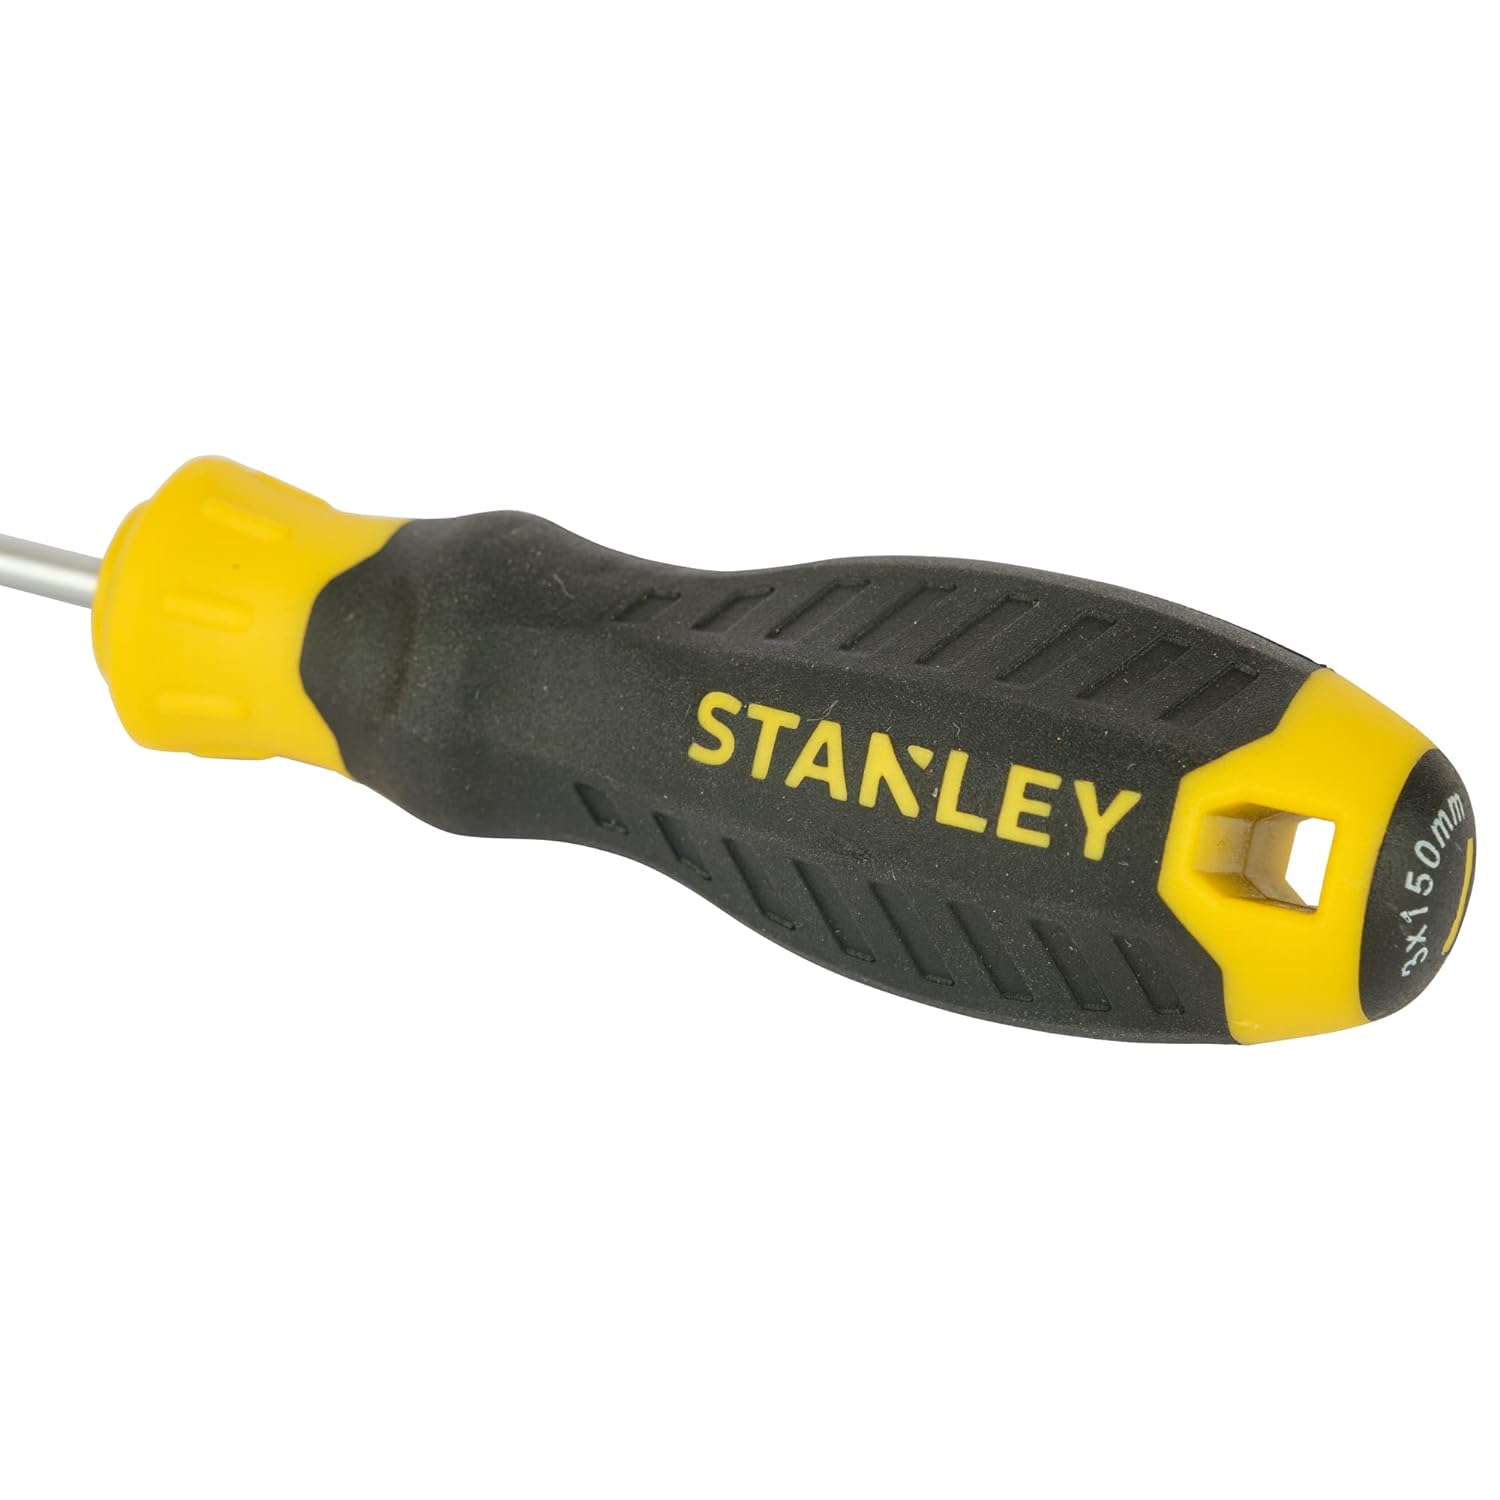 Stanley 3mm Slotted Screwdriver - STMT60820-8 | Supply Master, Accra, Ghana Screwdrivers Buy Tools hardware Building materials